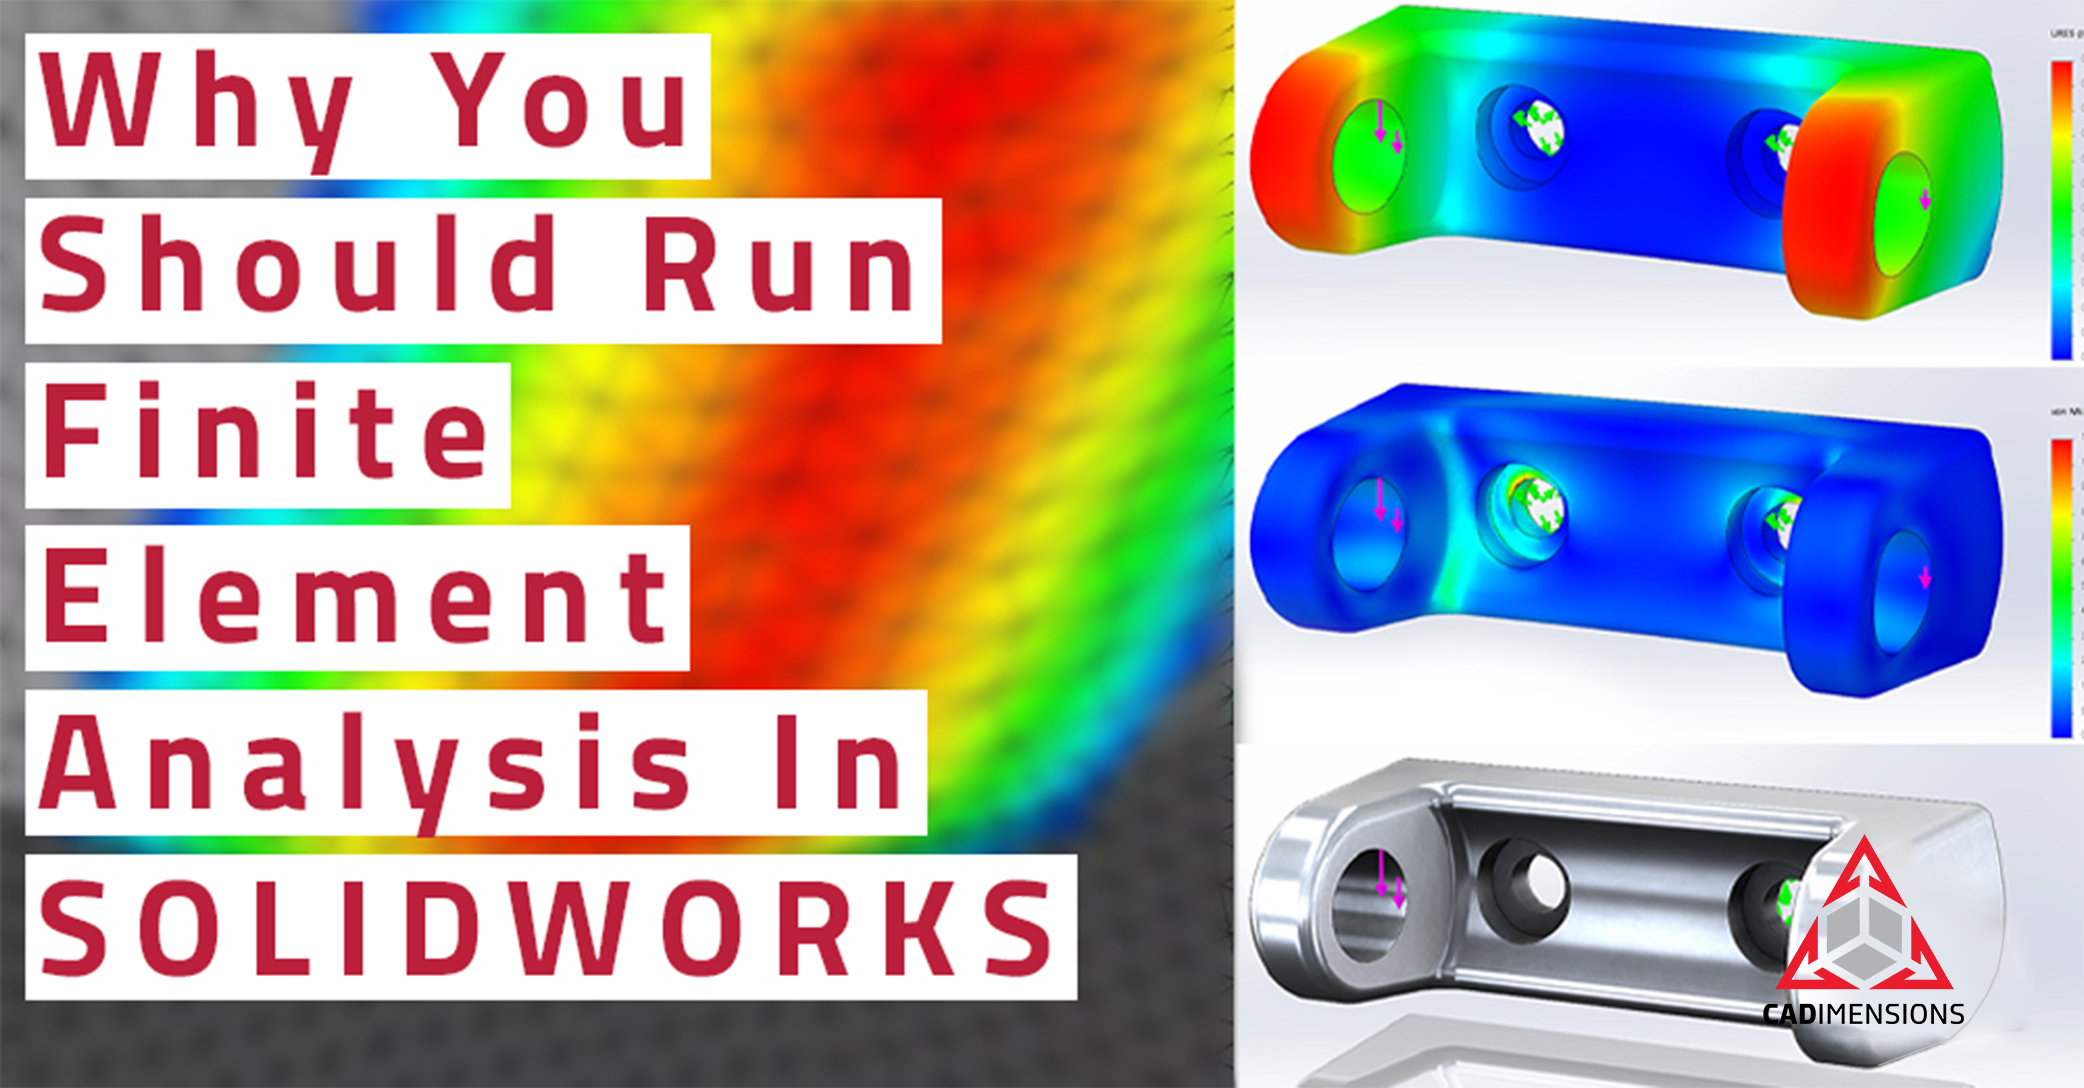 5 Reasons to Run Finite Element Analysis in SOLIDWORKS